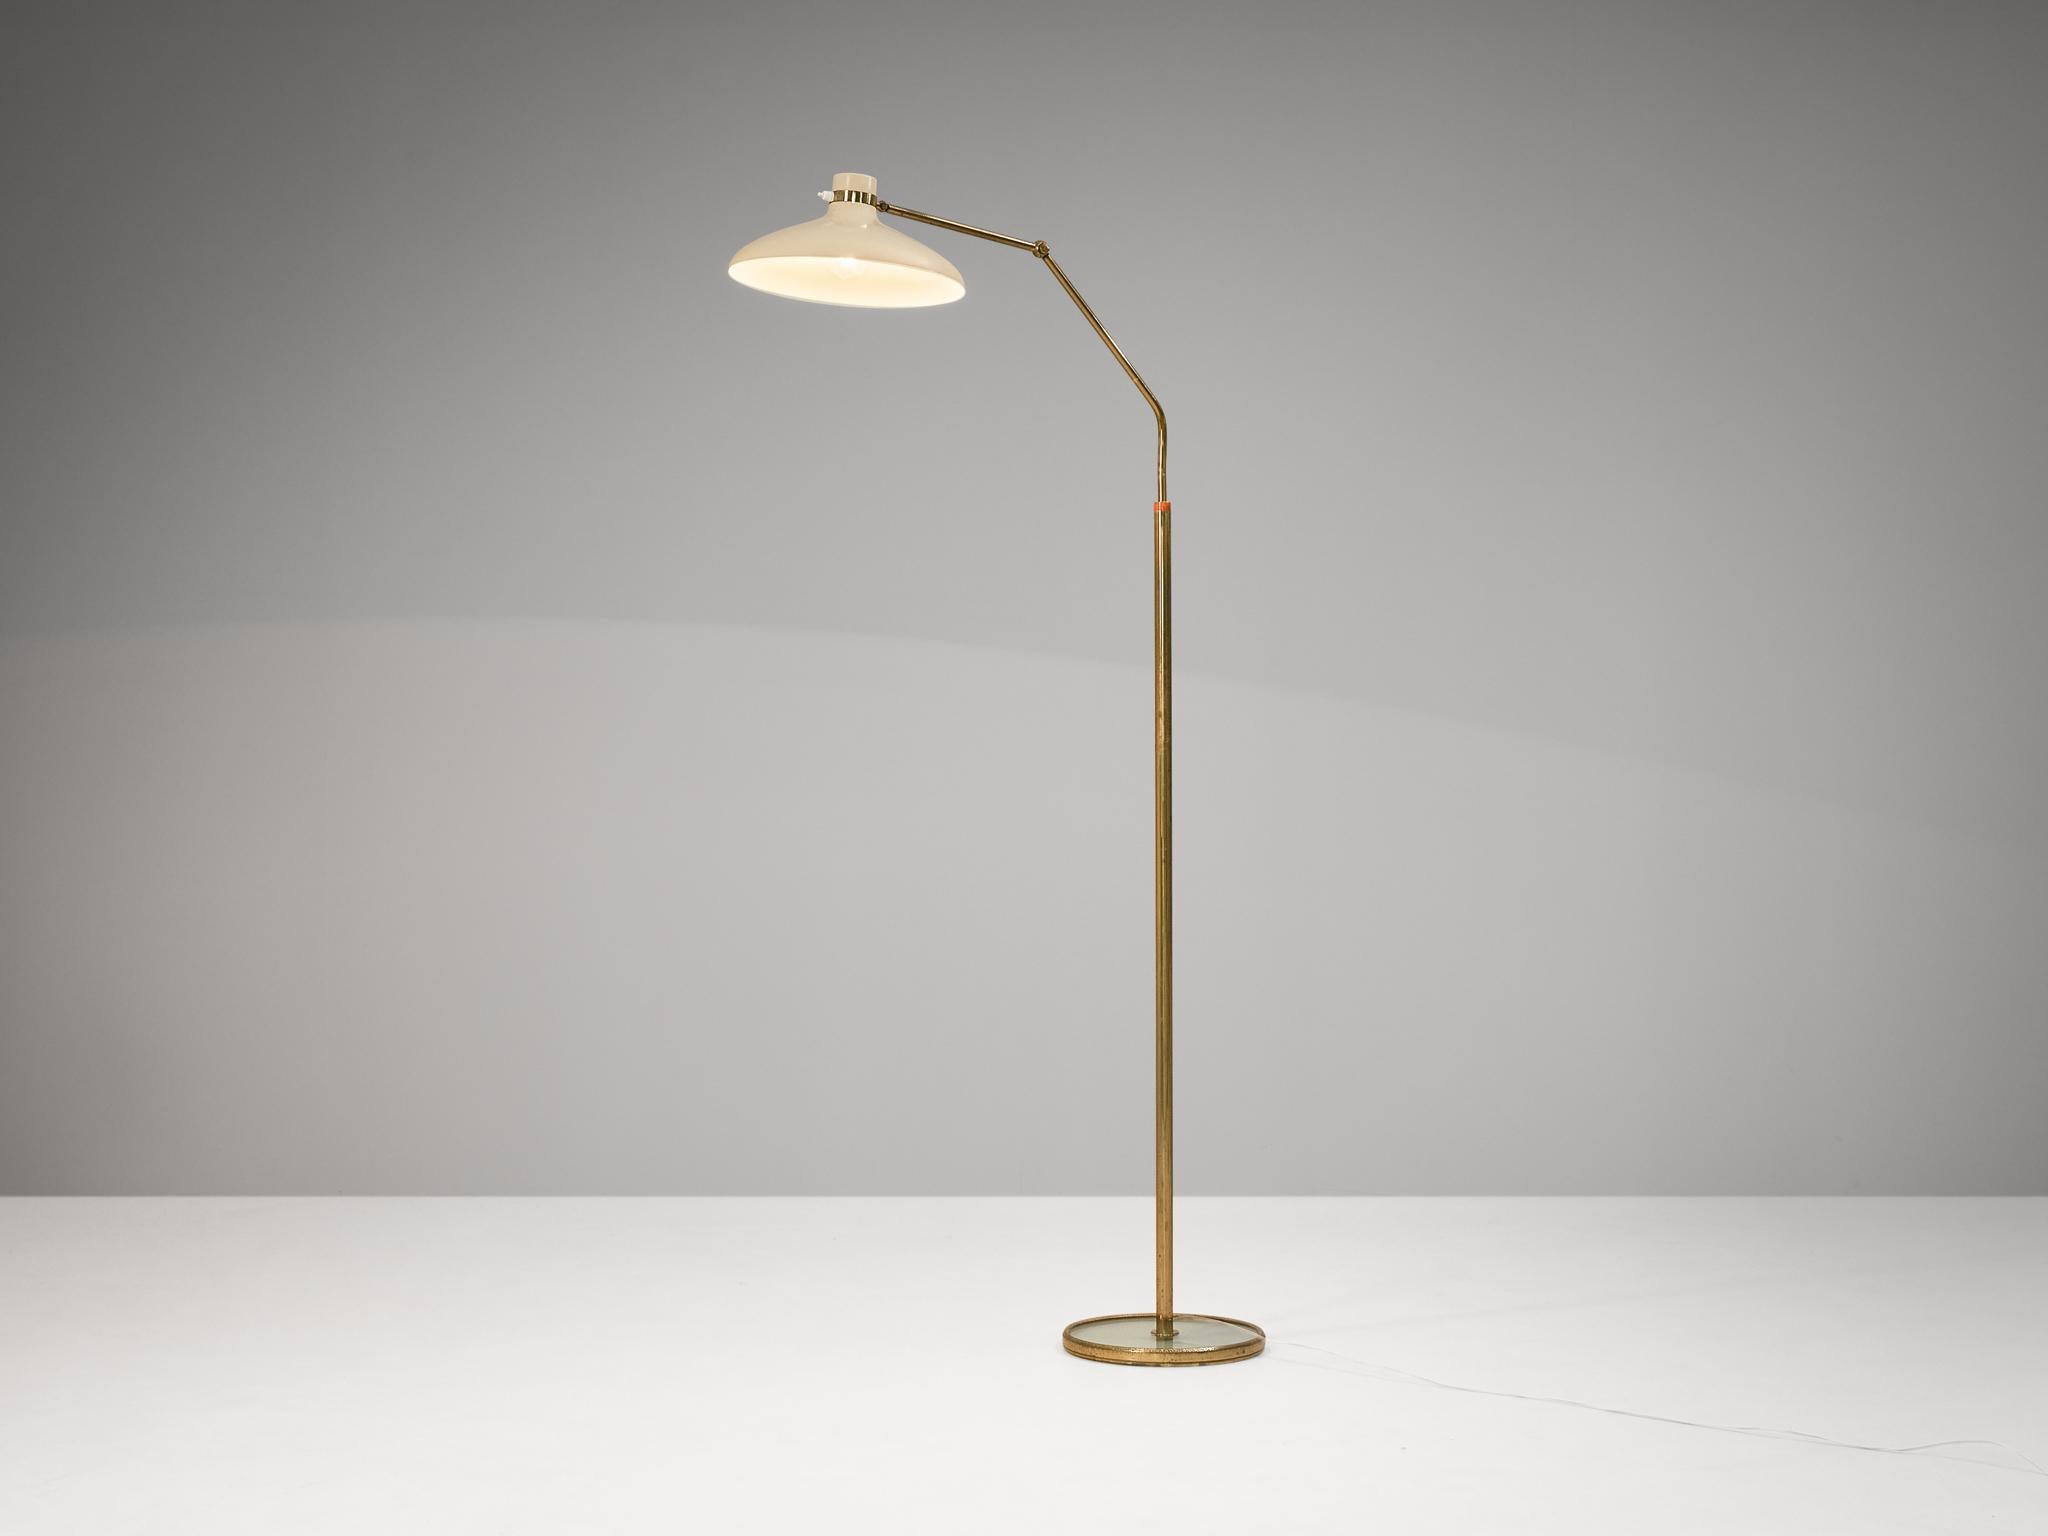 Gio Ponti for Fontana Arte, floor lamp ‘Parco dei Principi’ model 1967, brass, glass, lacquered metal, bakelite, Italy, circa 1960

This delicate floor lamp by Gio Ponti is derived from the design that has been created for the Hotel Parco dei